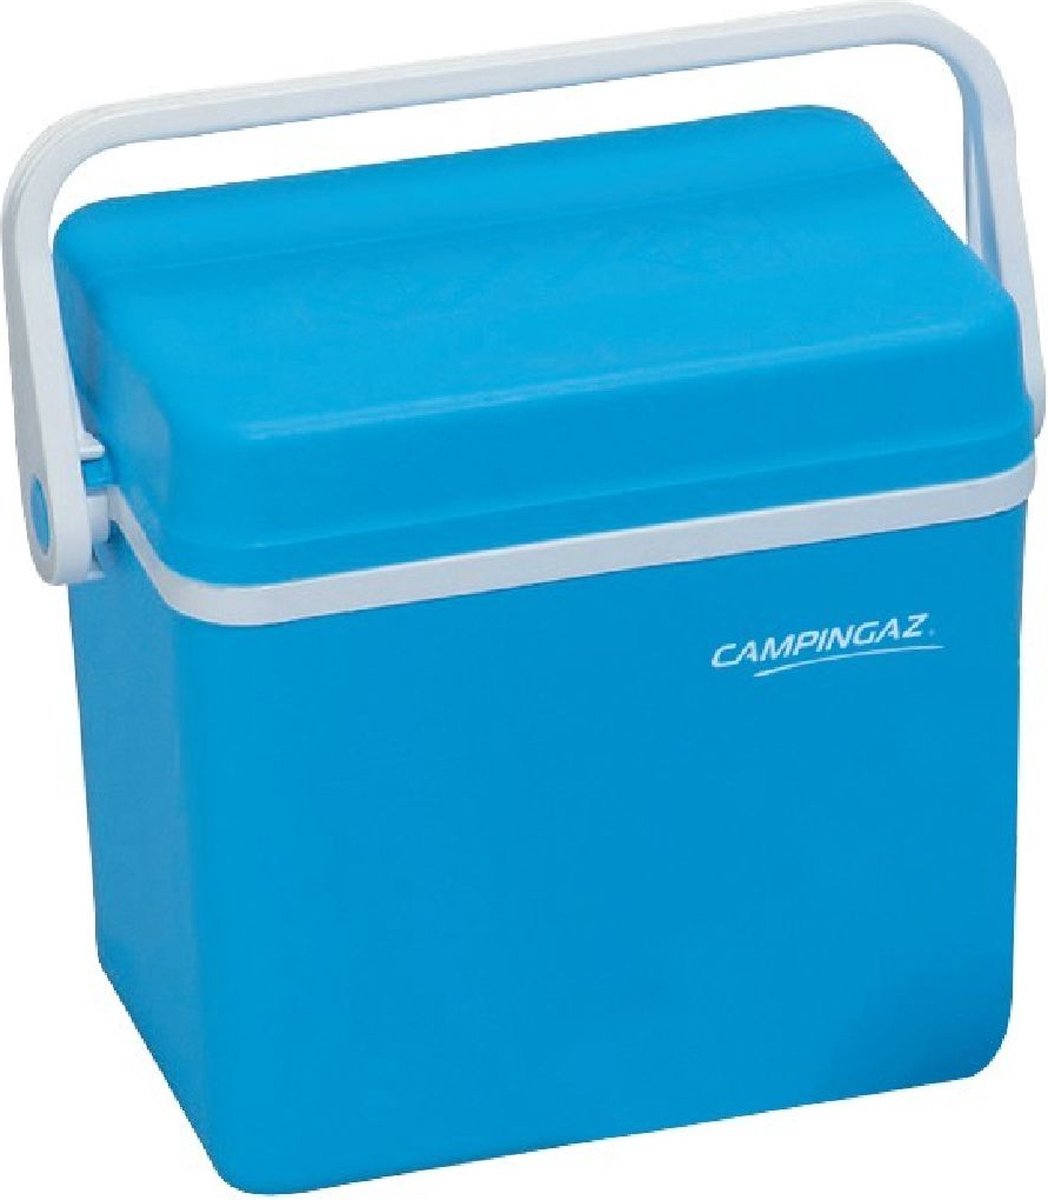 Campingaz Isotherm Extreme 10L Cooler